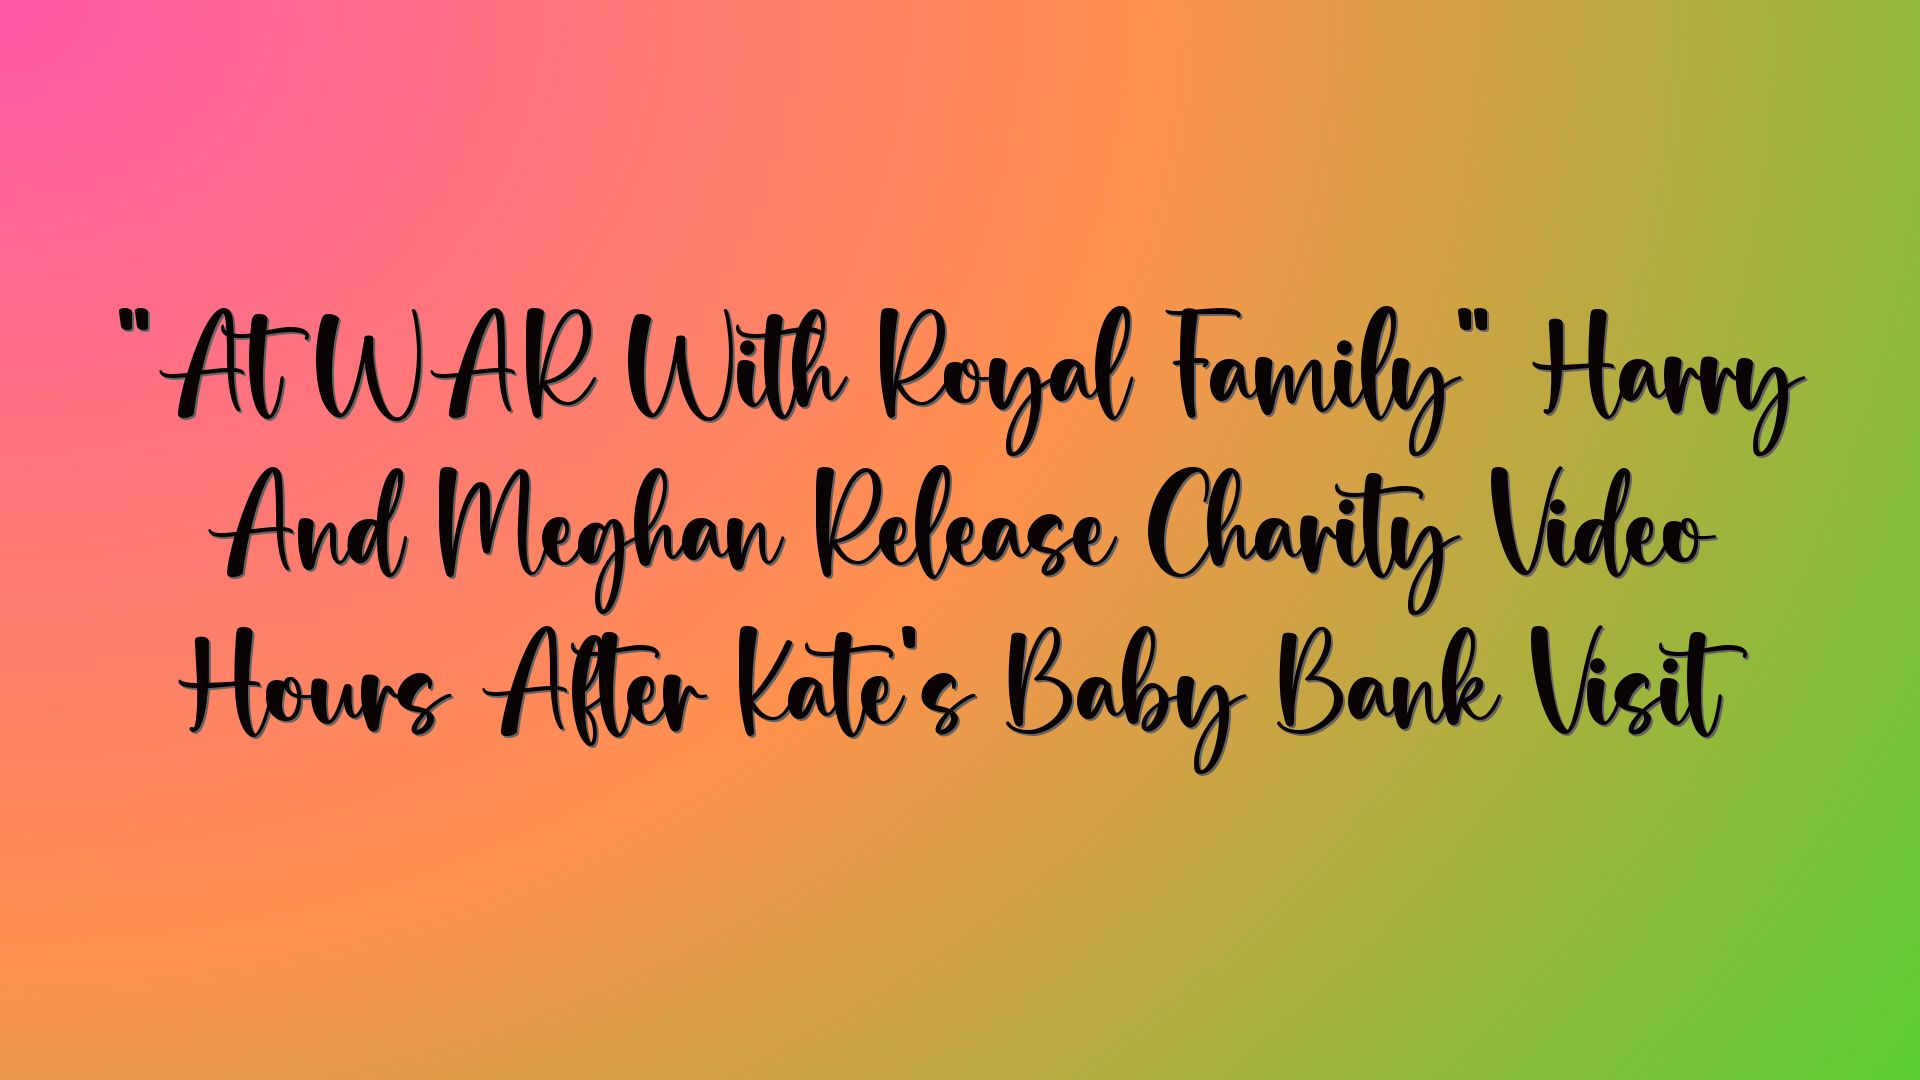 “At WAR With Royal Family” Harry And Meghan Release Charity Video Hours After Kate’s Baby Bank Visit